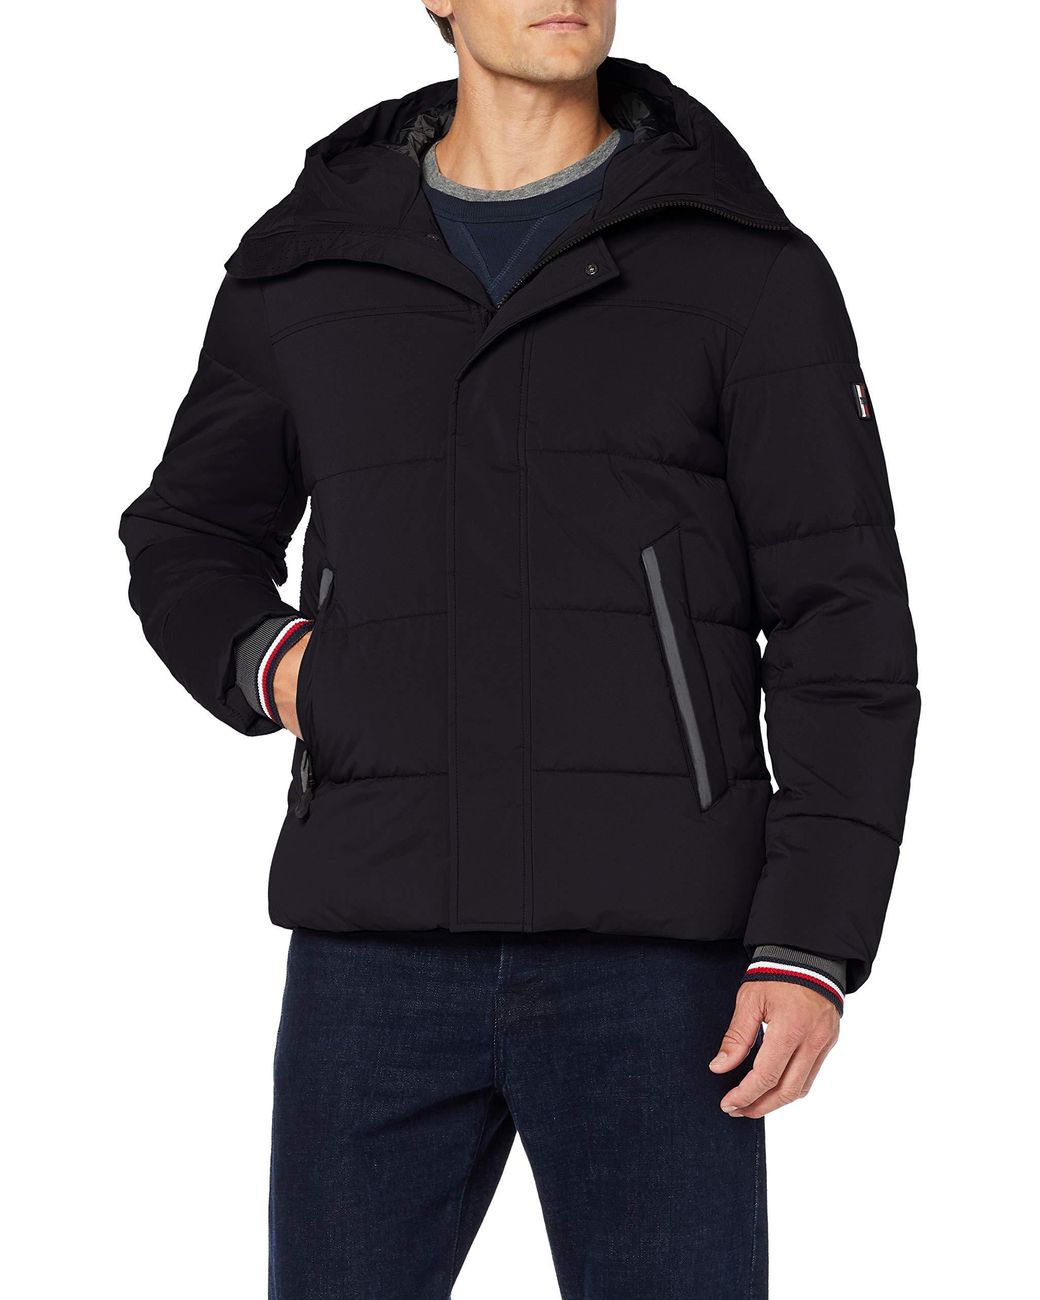 STRETCH NYLON HOODED Jackets SORT From Tommy Hilfiger 227 EUR | cigam.mus.br